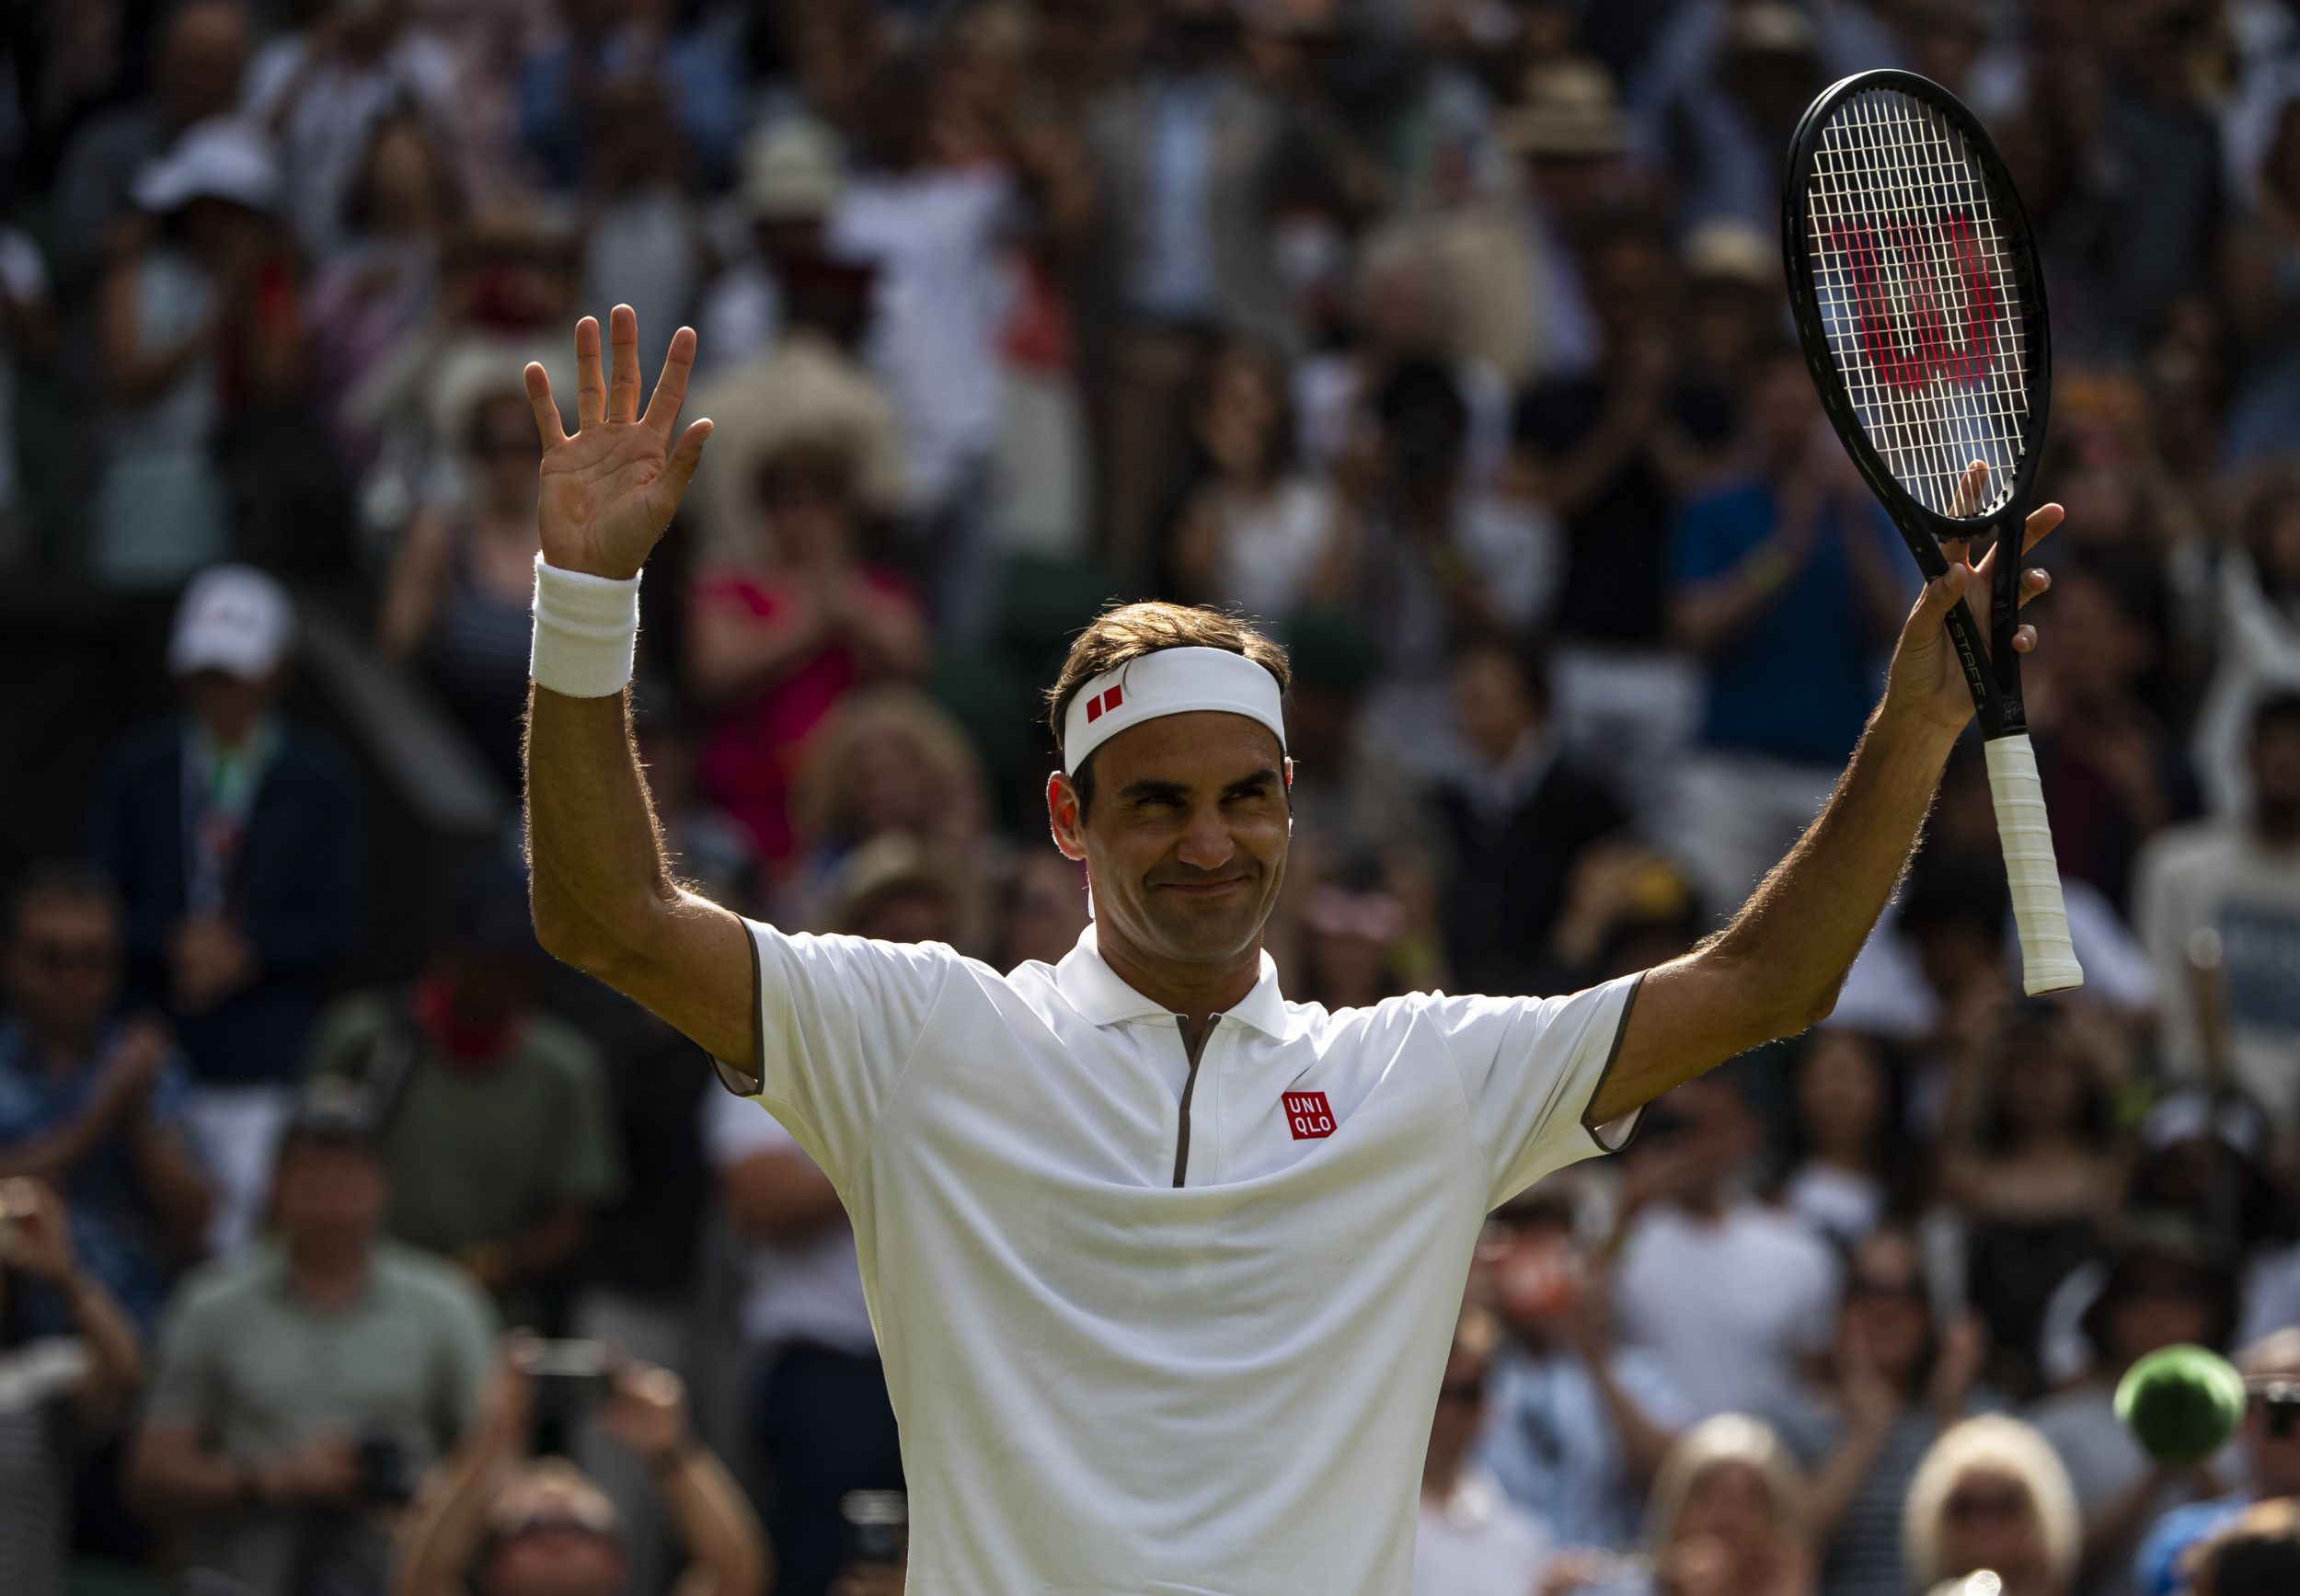 Wimbledon 2019 How to Watch Roger Federer, Rafael Nadal, Serena Williams Second-round Matches, Start Times, Live Stream